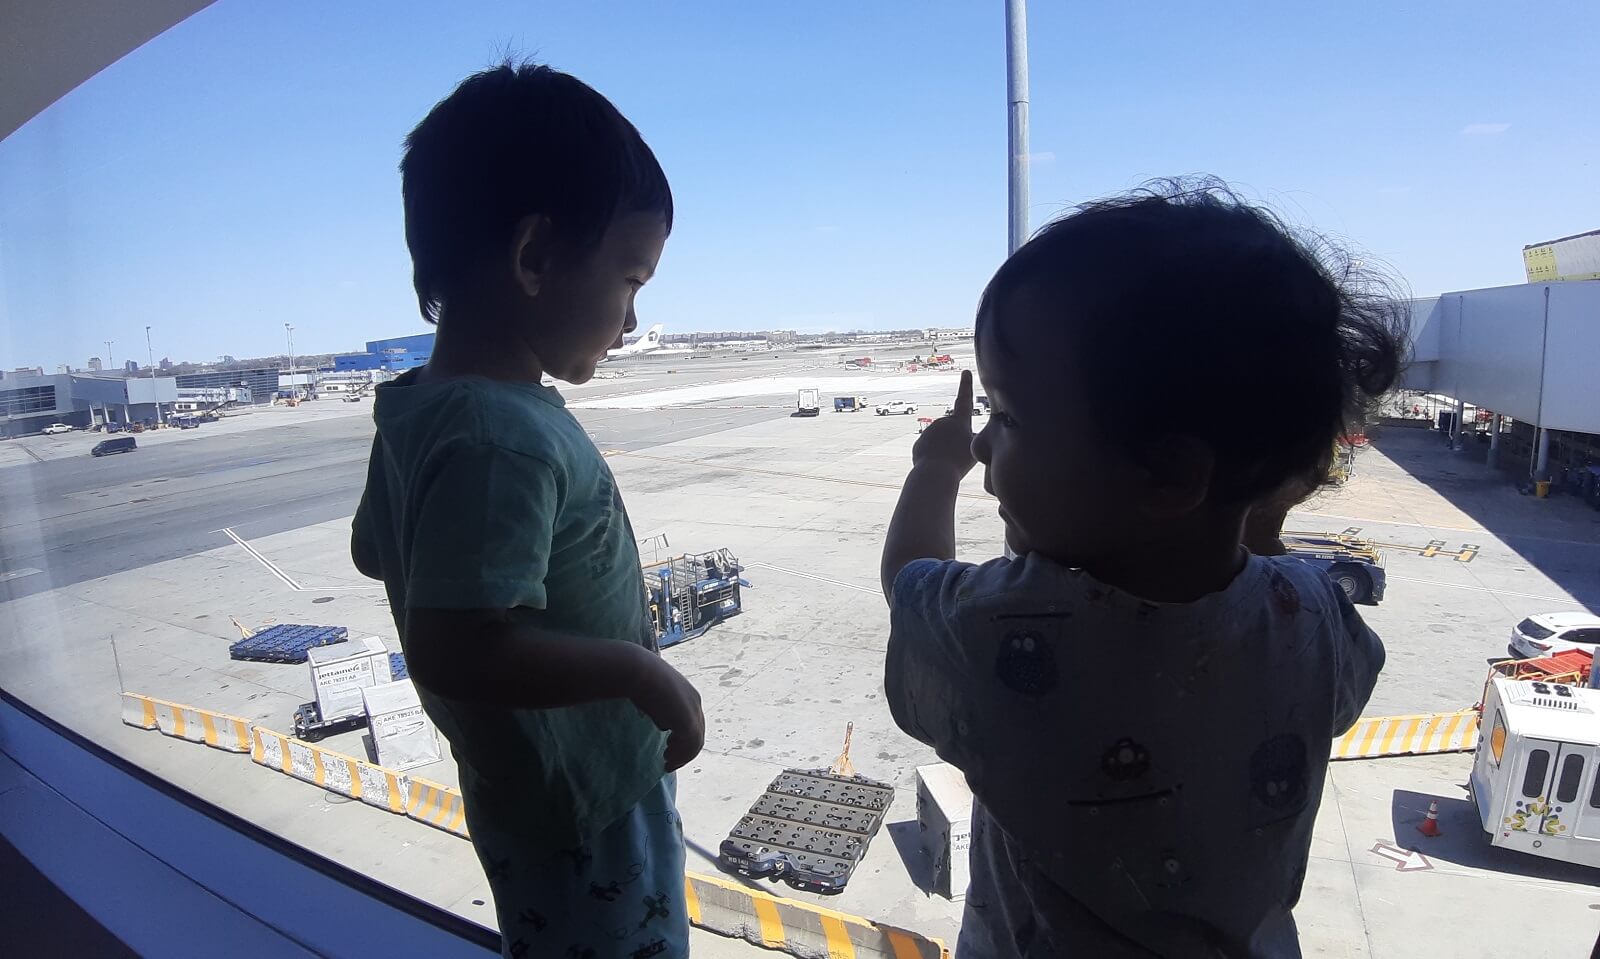 Toddlers at window looking out at sunny airport tarmac